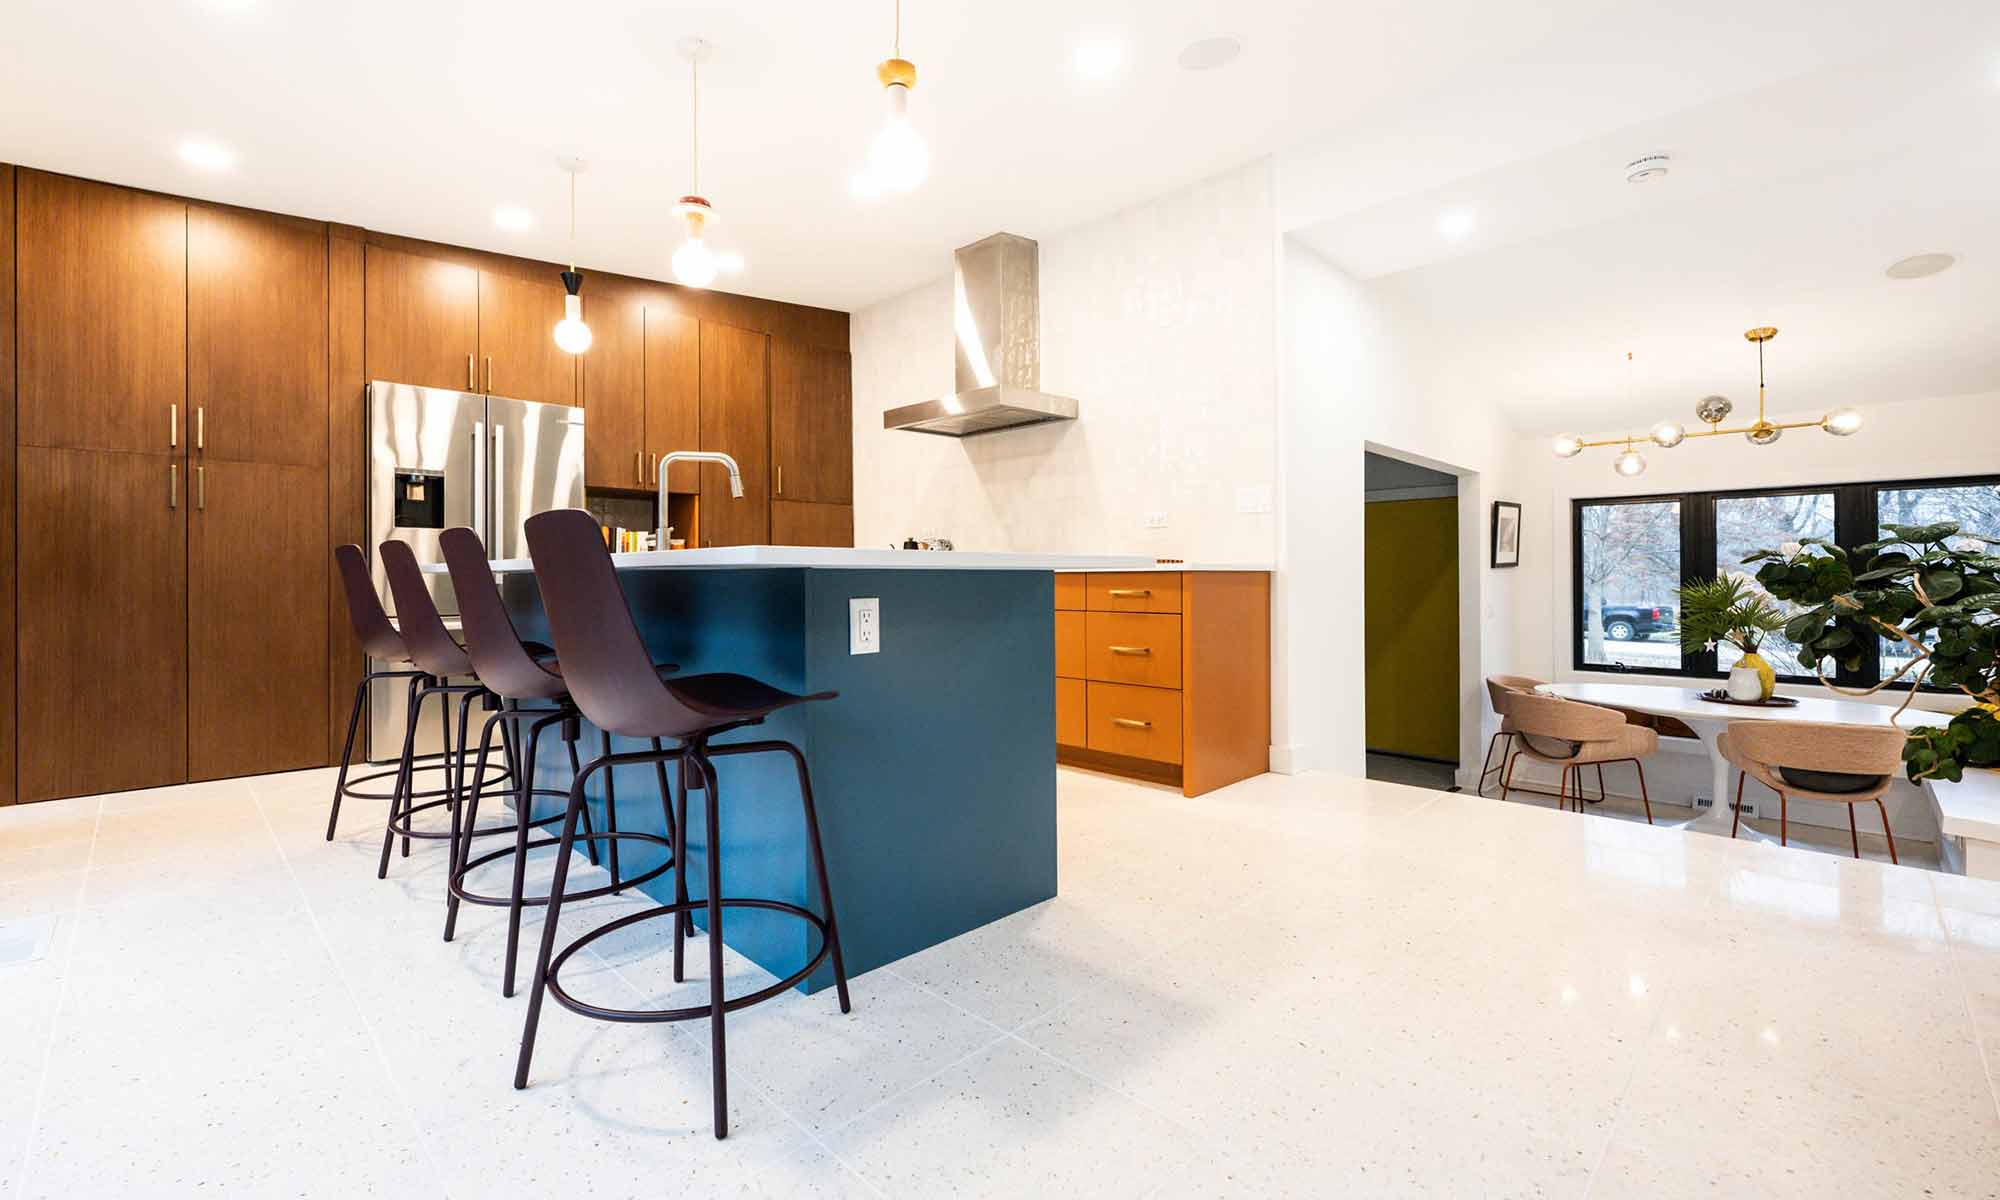 Mid century modern luxury kitchen remodel in Riverside IL by LivCo with blue island orange perimeter cabinets walnut tall cabinets and terrazzo flooring looking down towards breakfast area